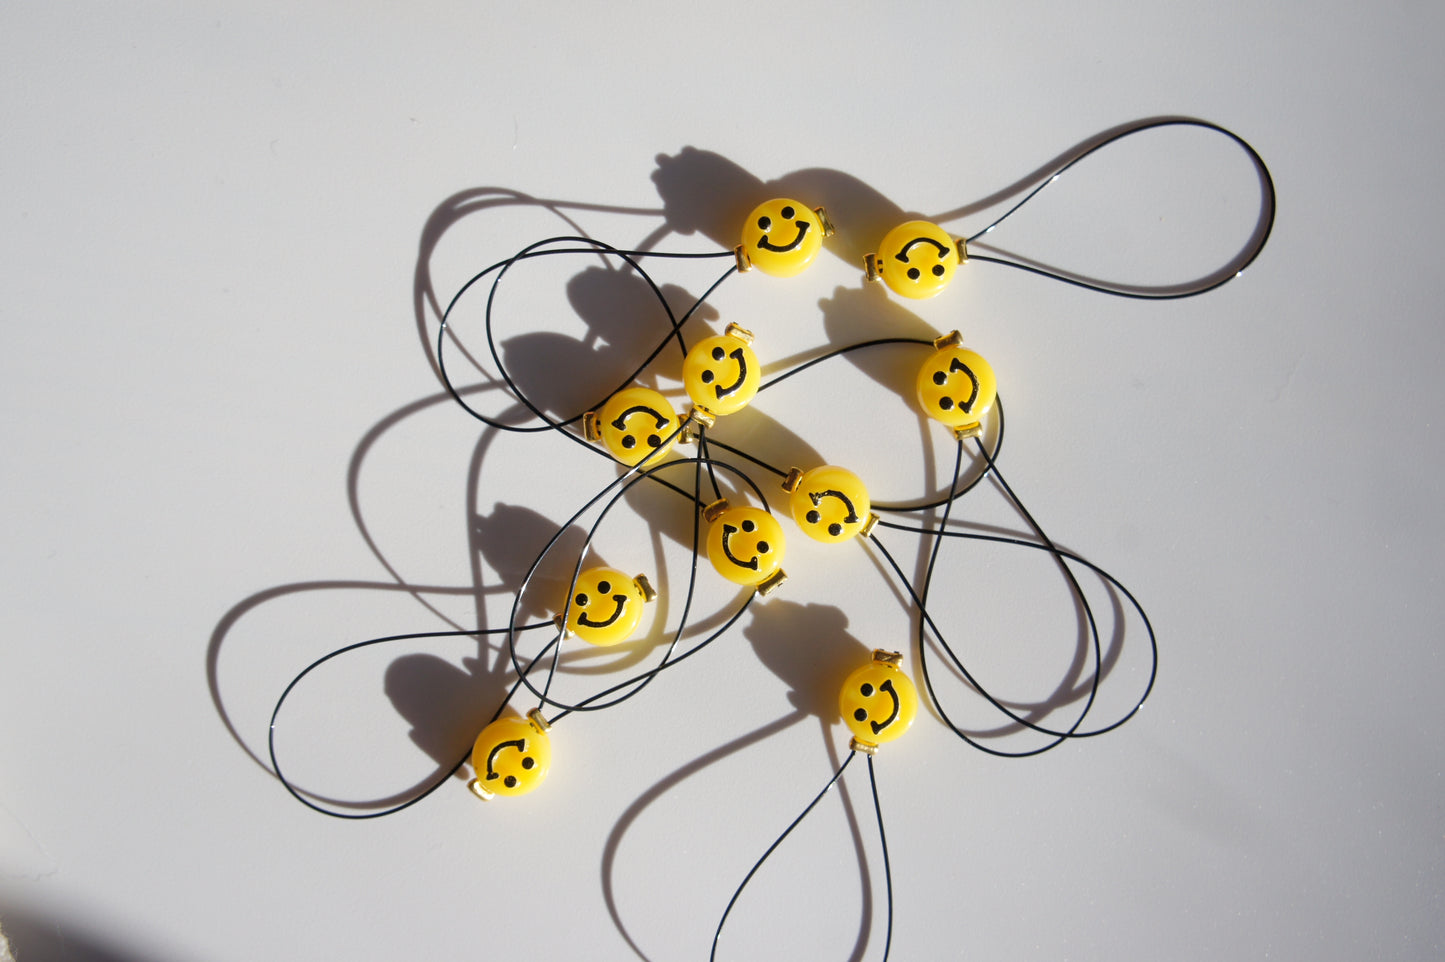 100% Handmade Stitch Markers - Heart/Smiley face/Star